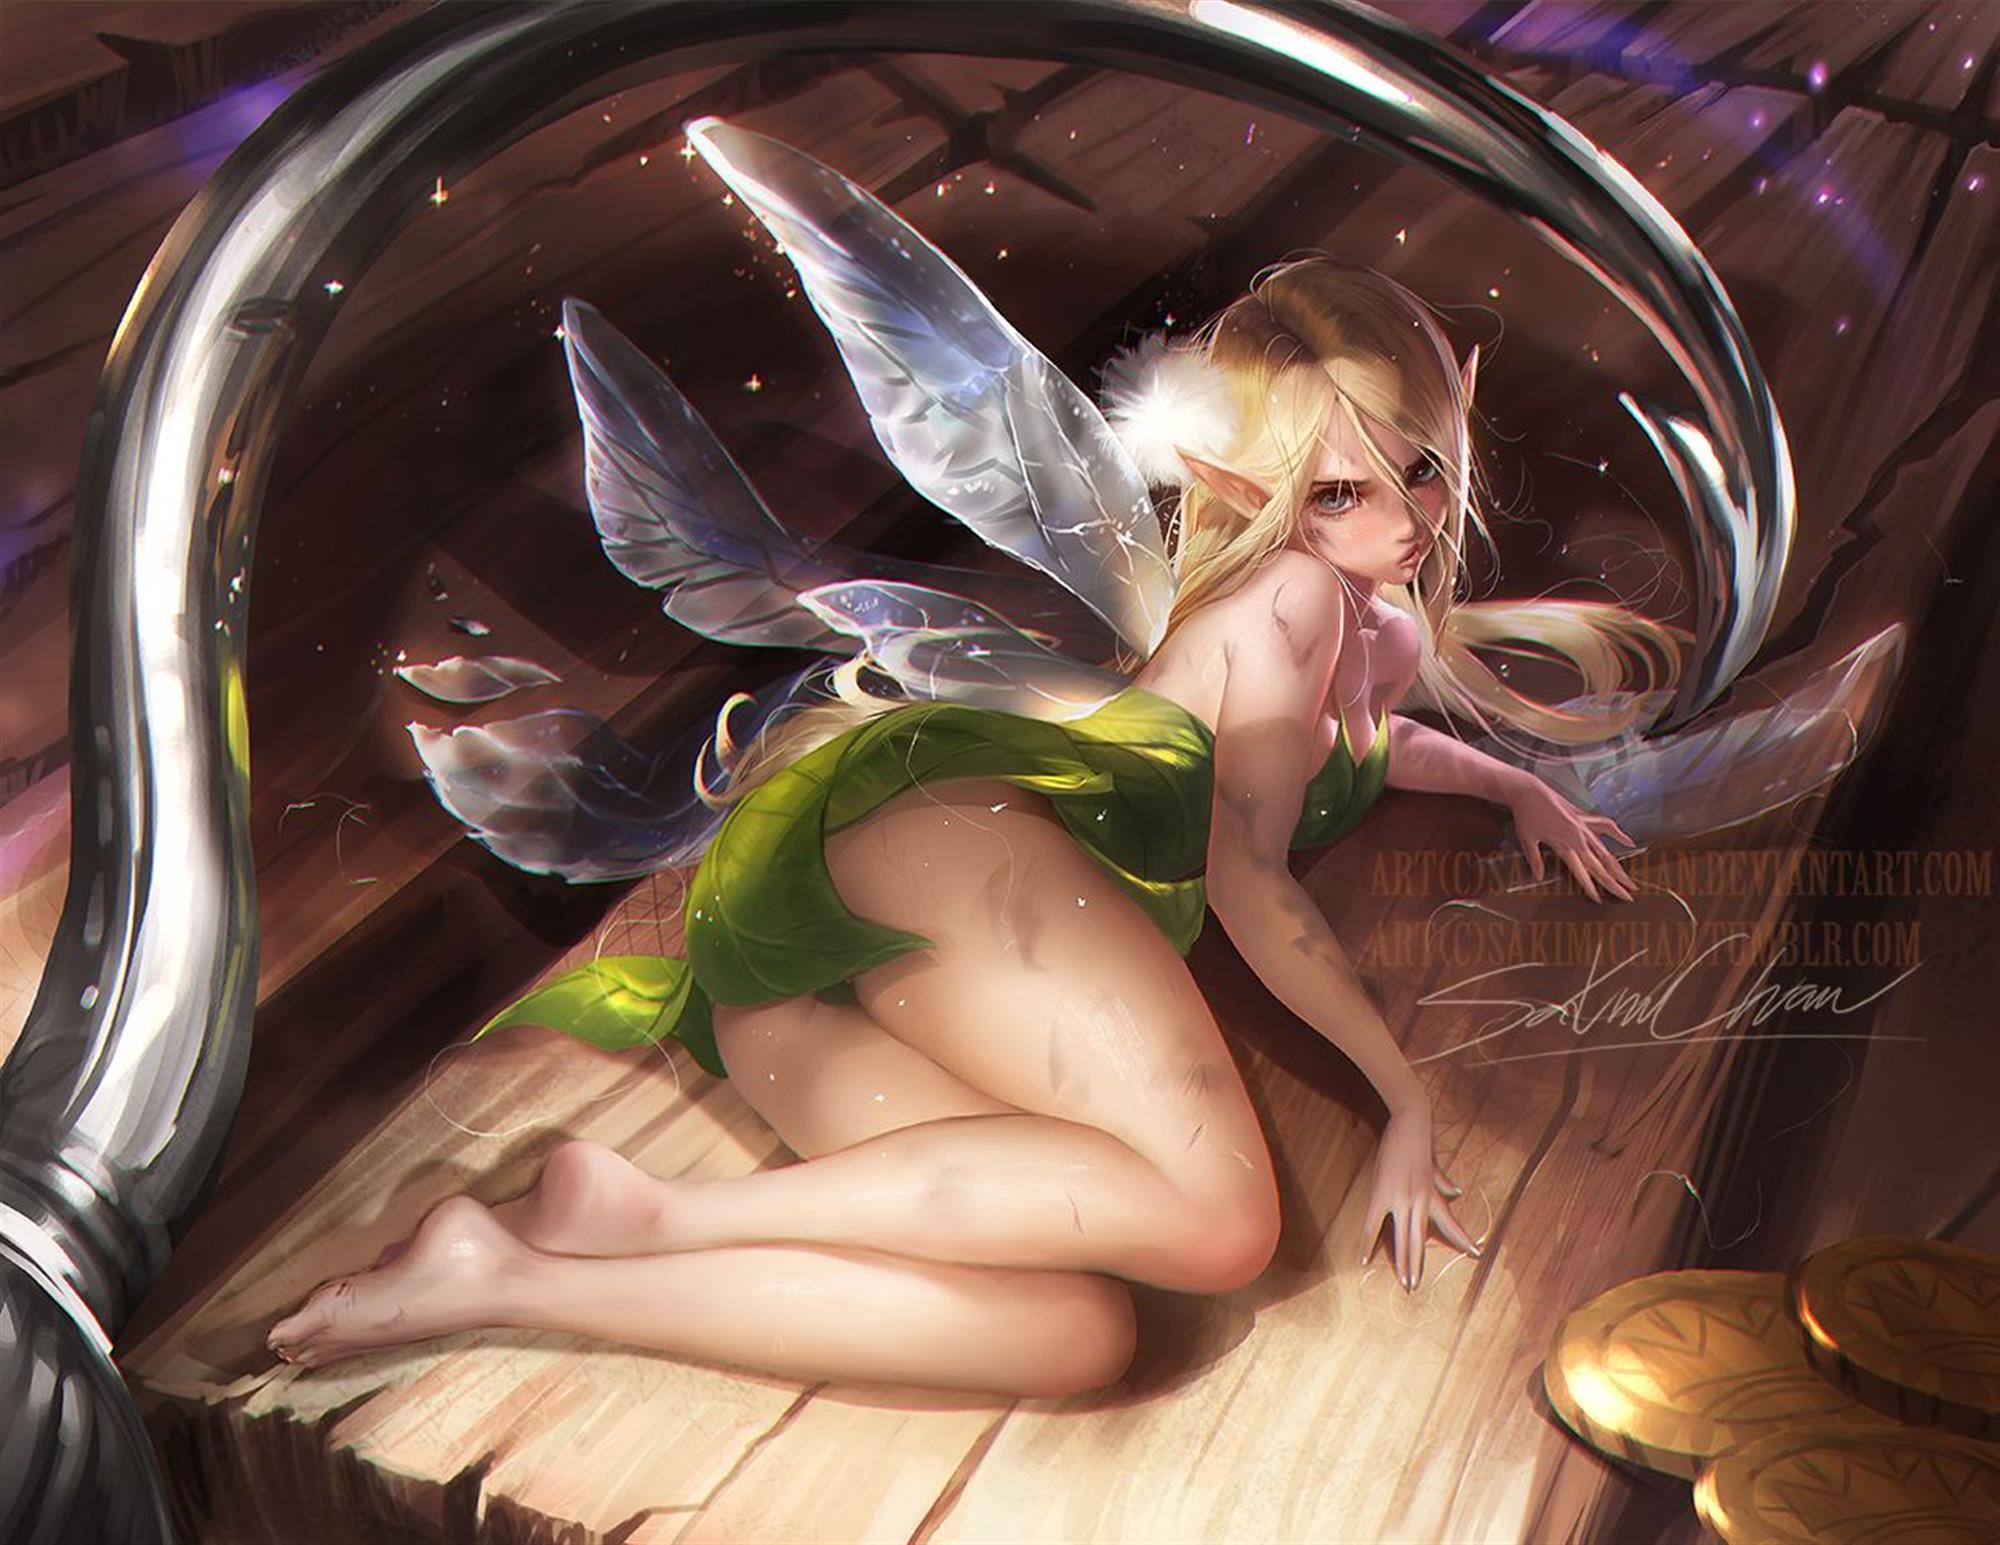 Tinkerbell Lesbian Hentai - Too tinker foto bell hentai opinion you Â» Online sex videos.